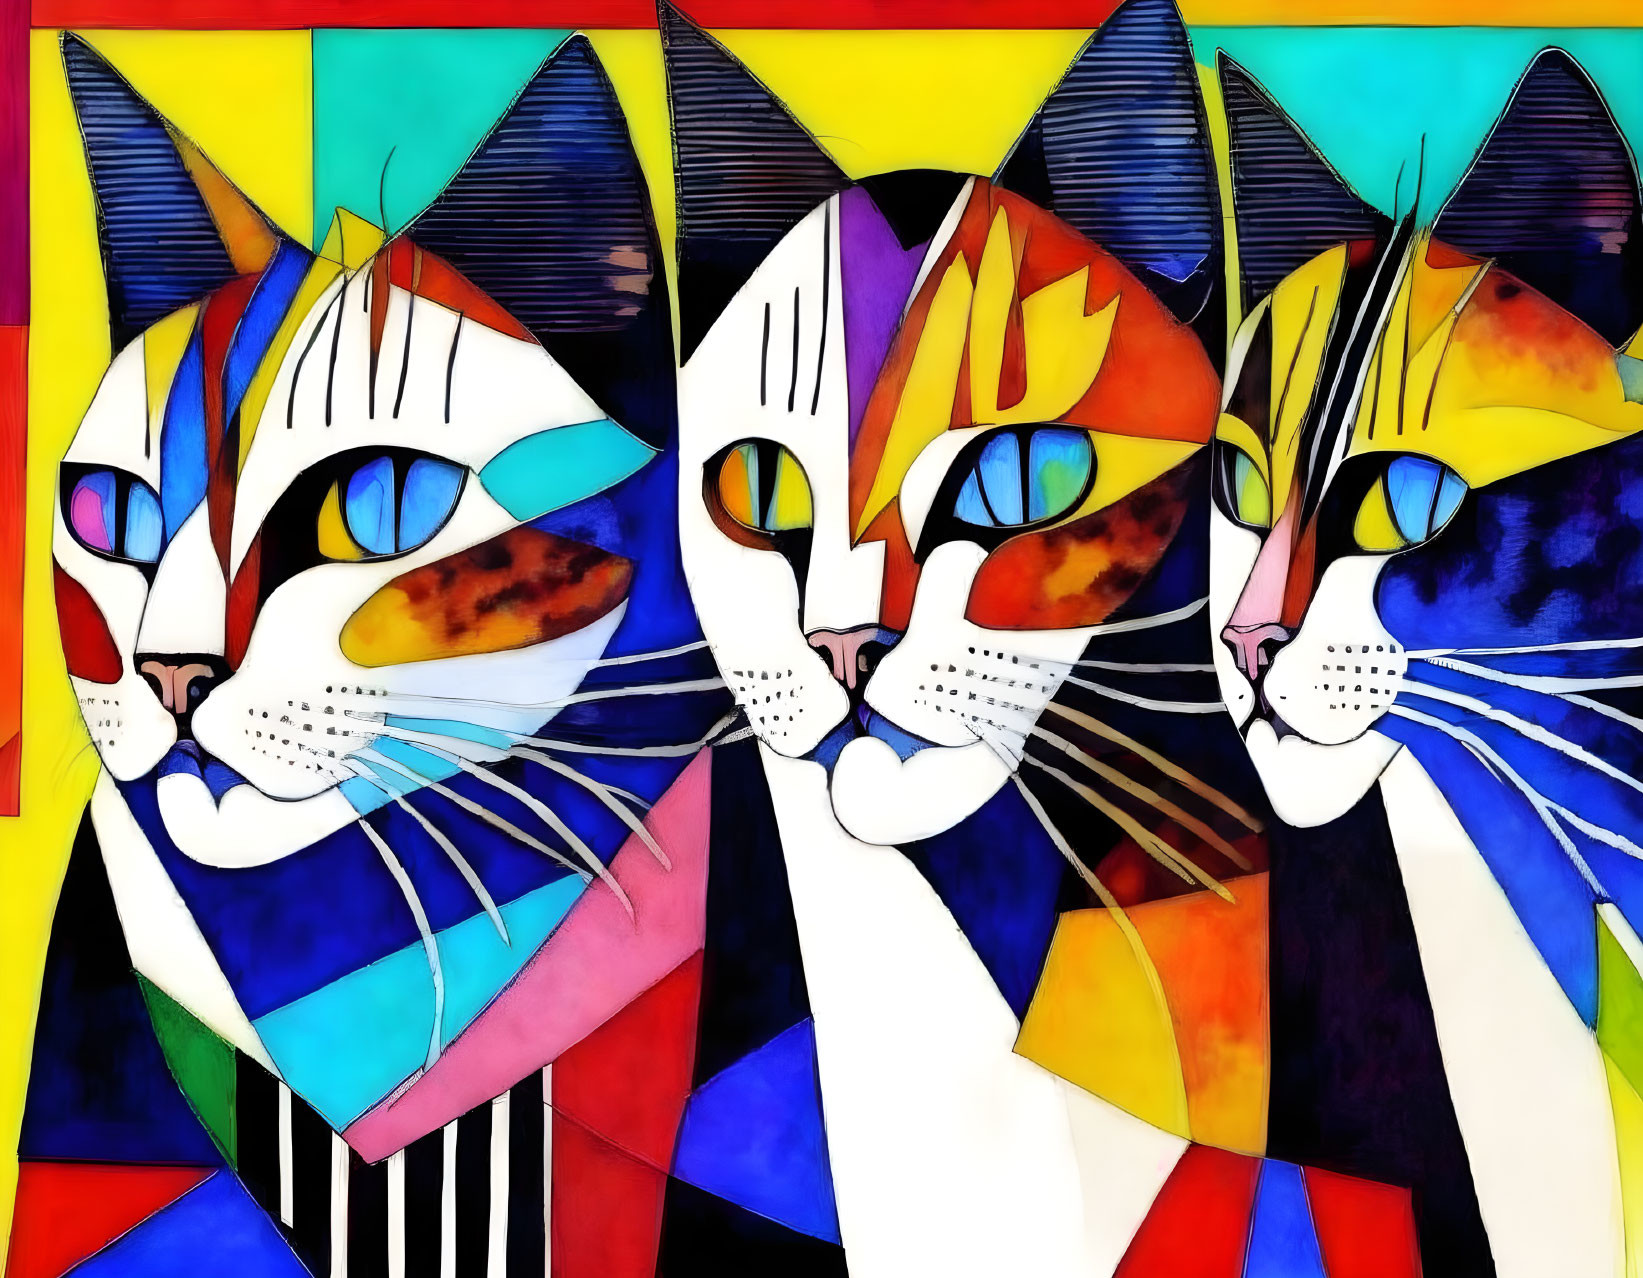 Vibrant geometric cat painting with patchwork patterns